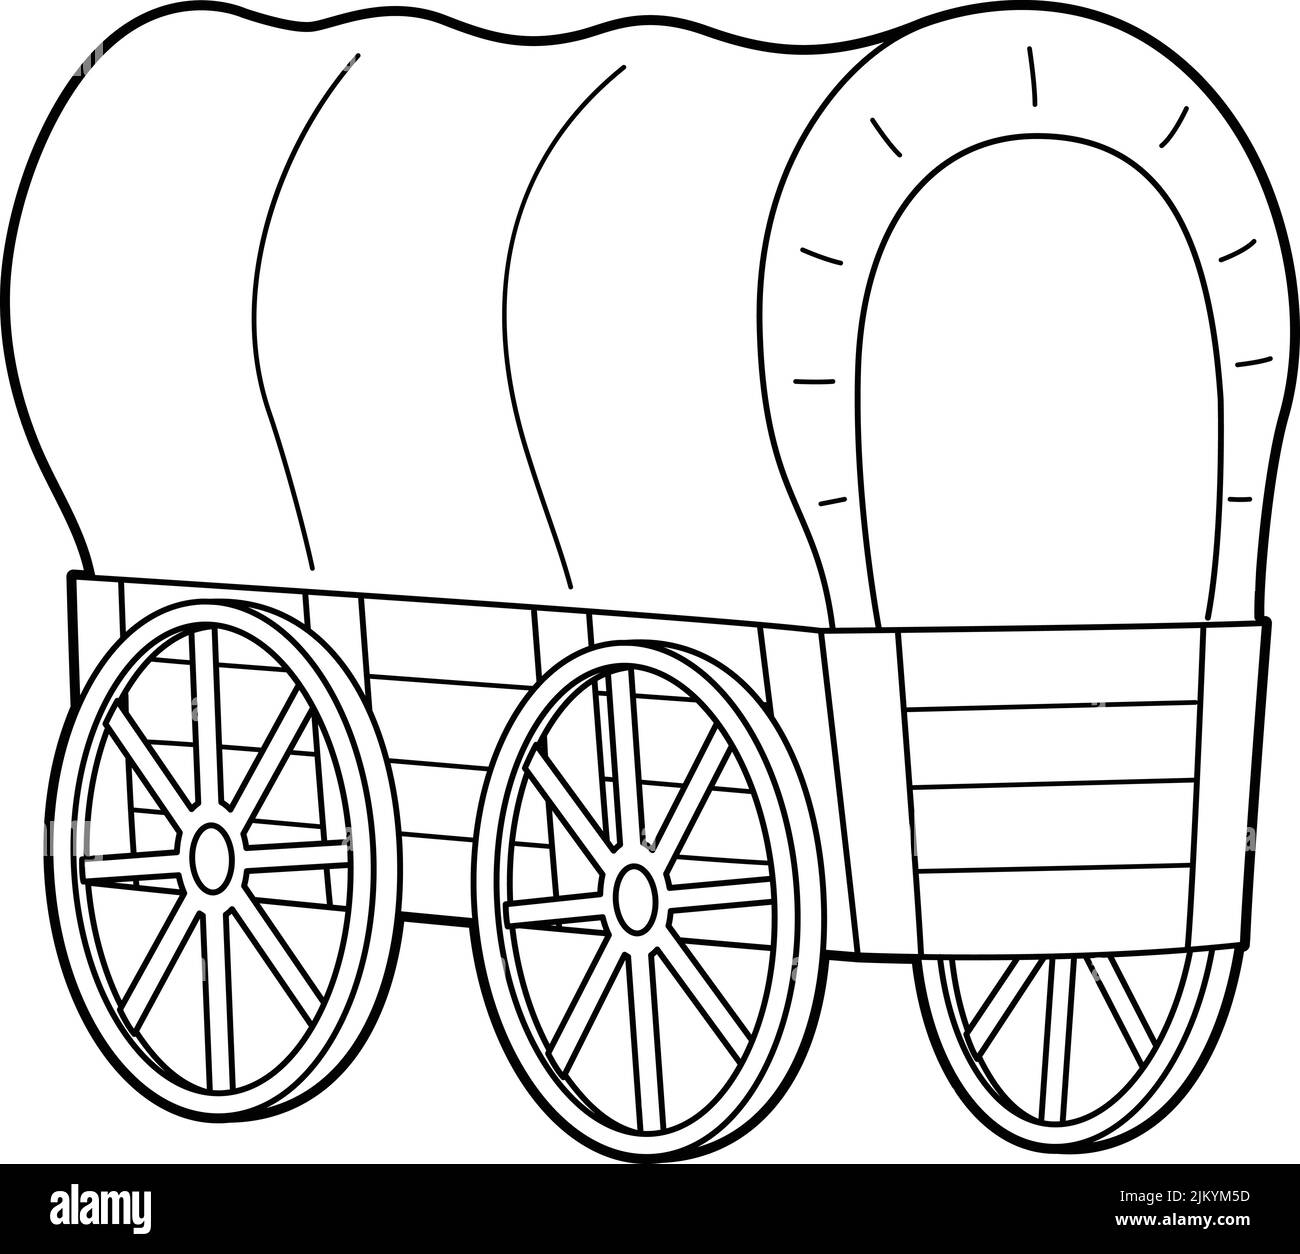 Wagon vehicle coloring page for kids stock vector image art